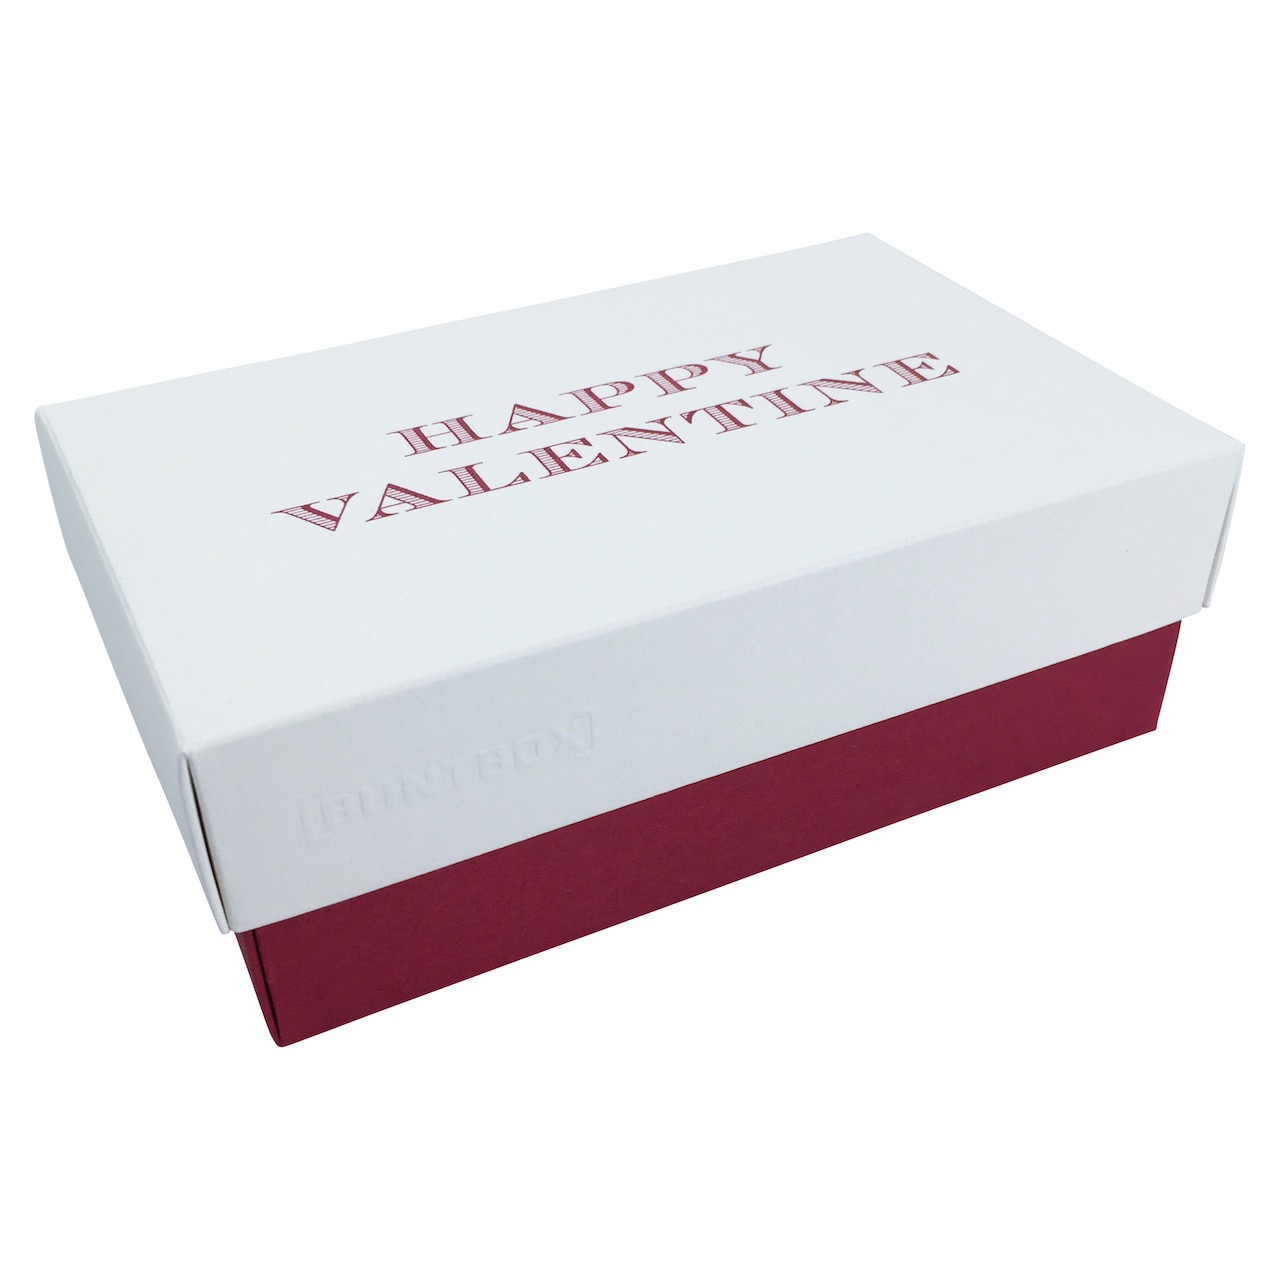 Fine Paper Edition Buntbox Champagne - Bordeaux 'Merry Christmas' - Red